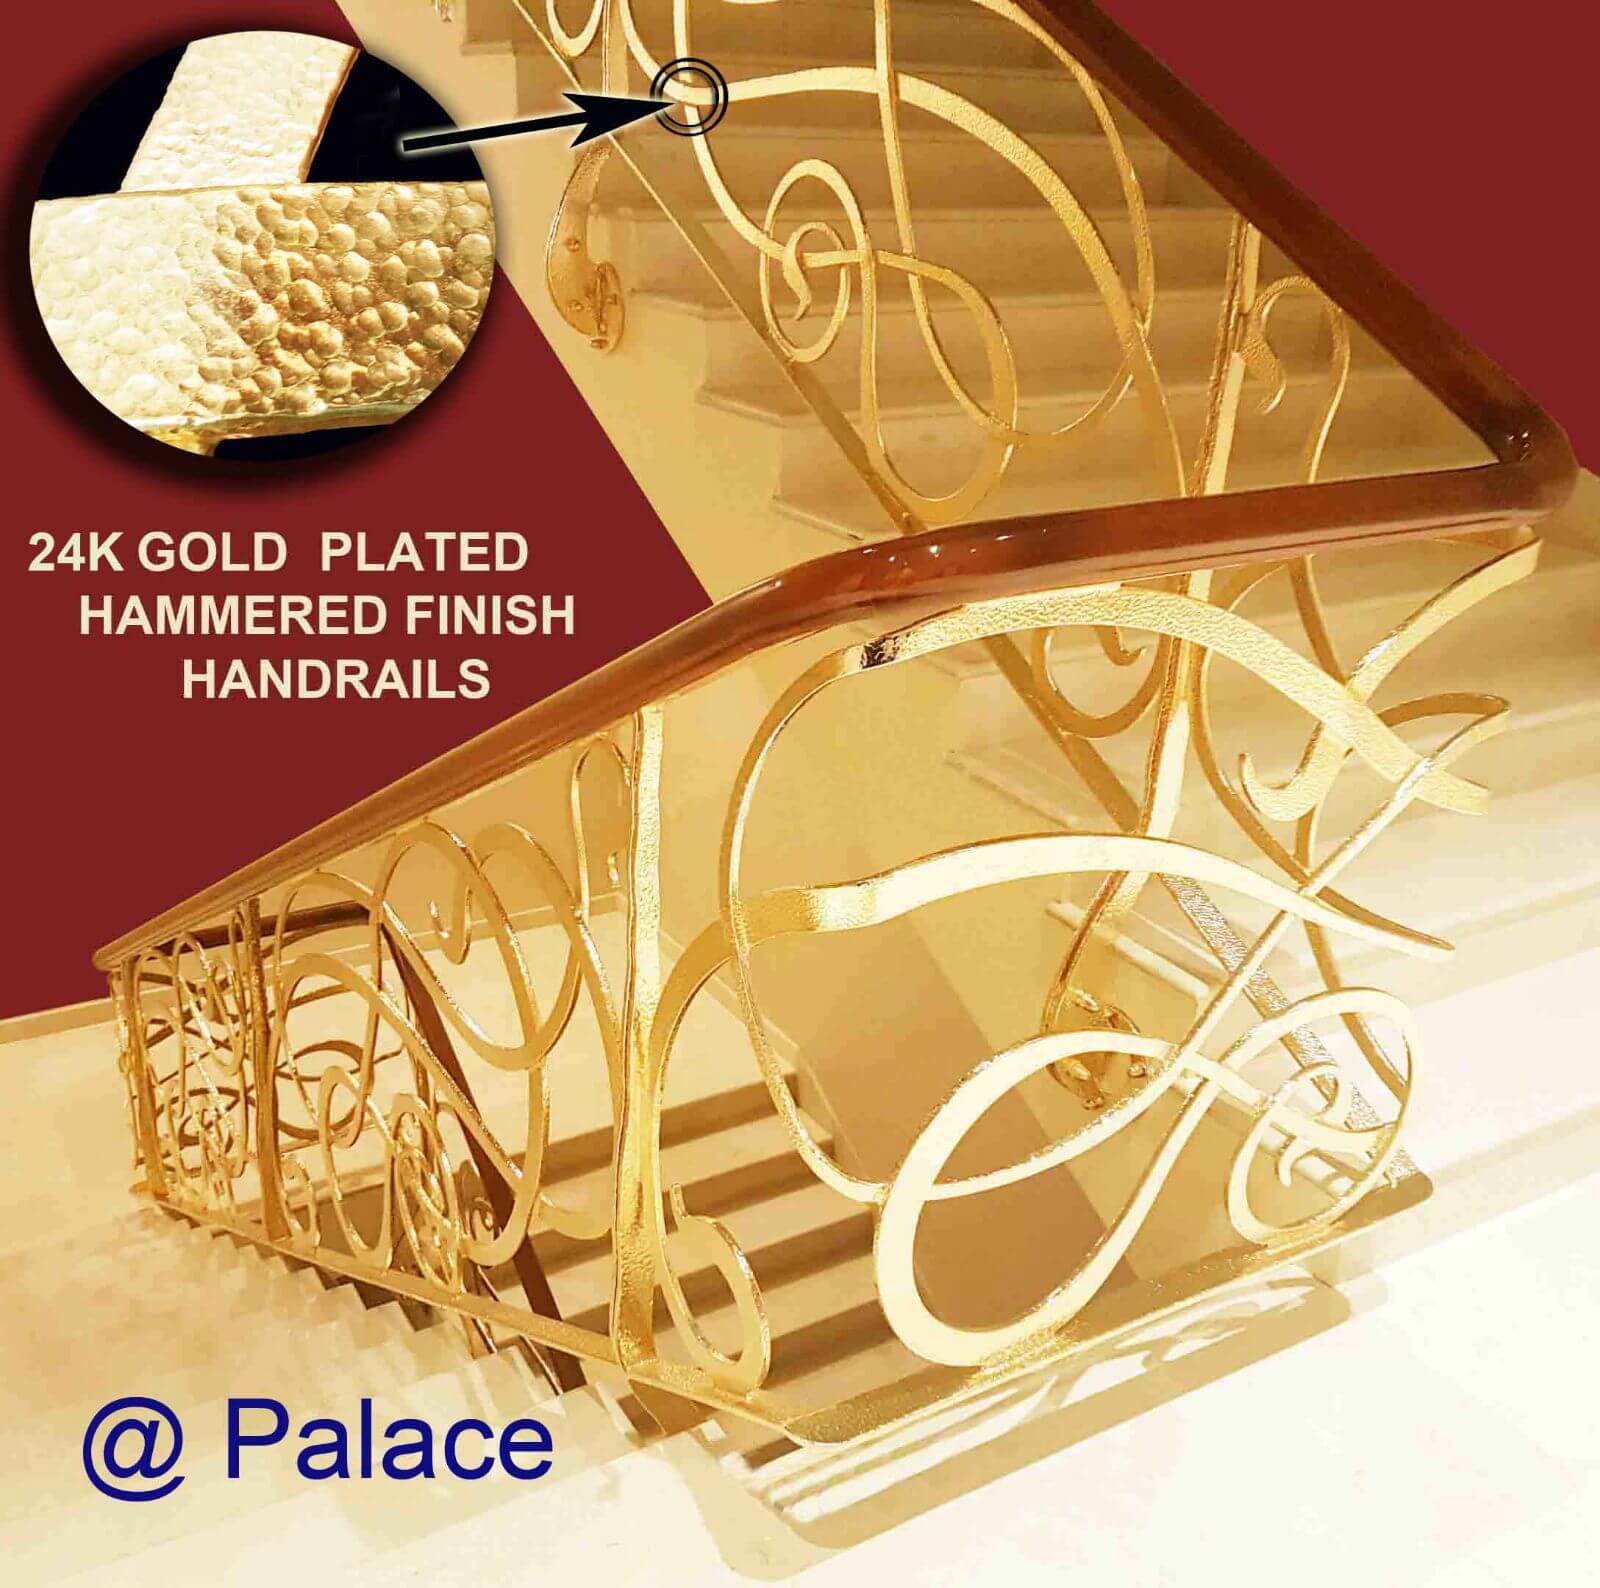 18 Year Old High-End Metal Decoration Company In Uae